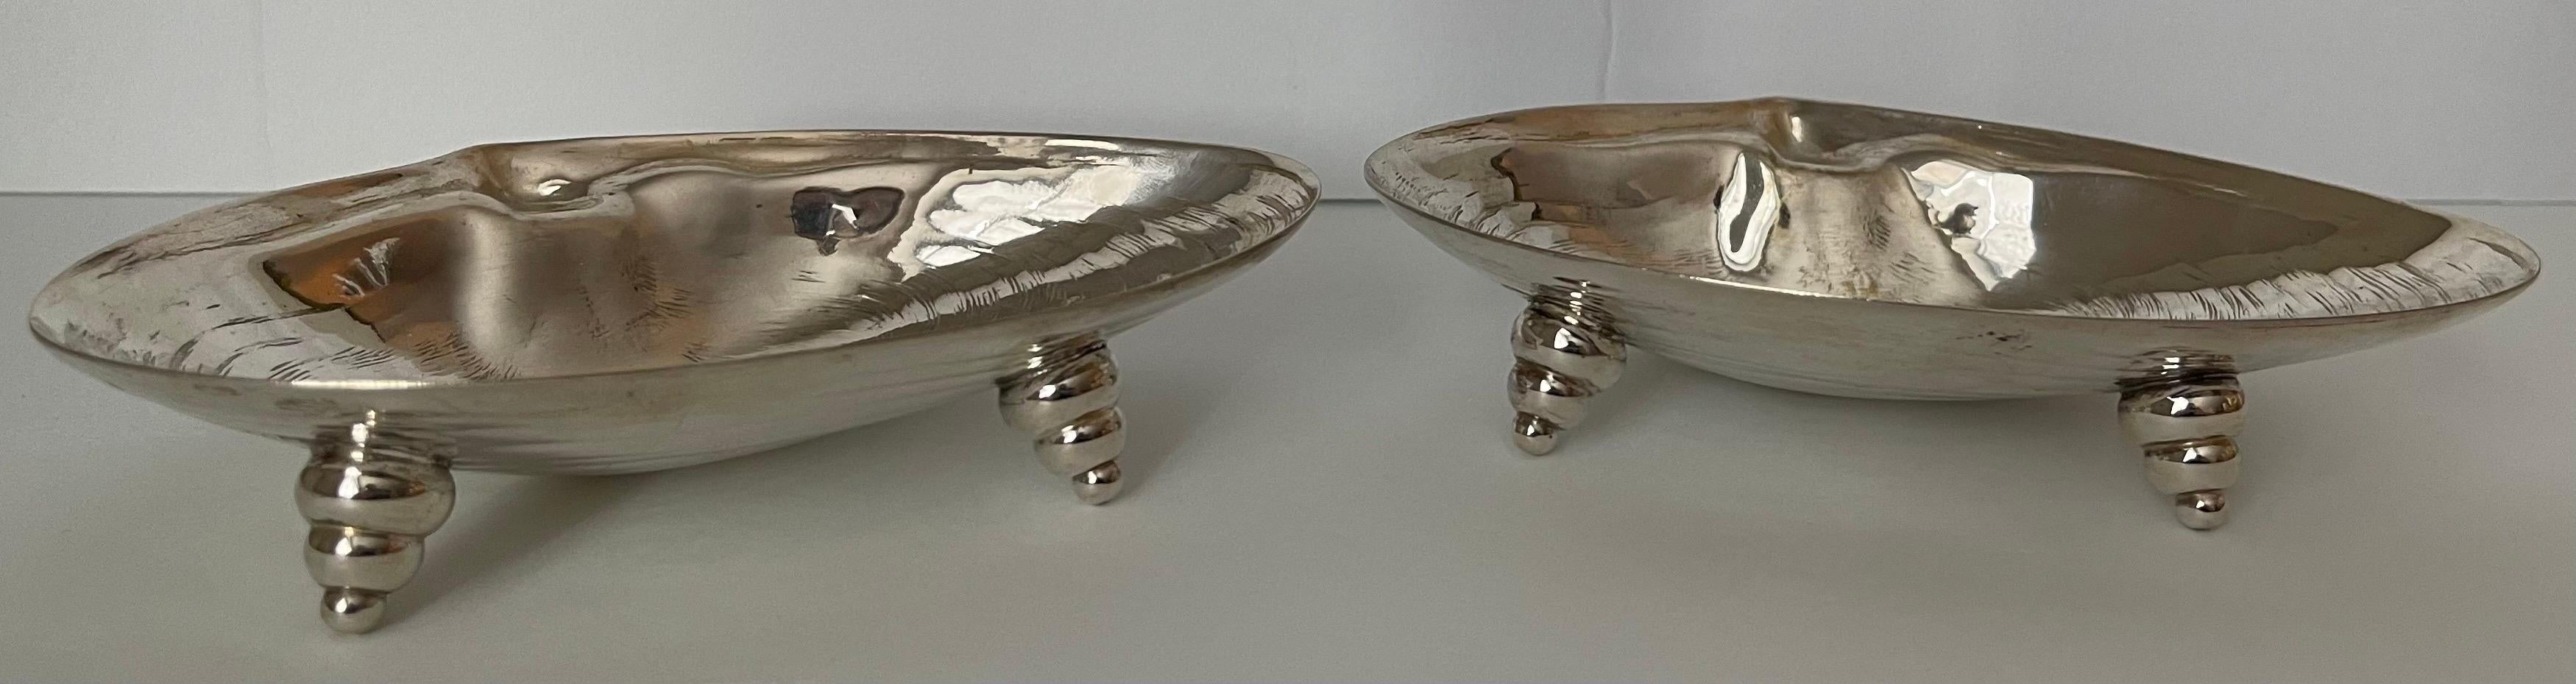 American Silver Plated Shell Form Candy Dishes or Ashtrays, Pair For Sale